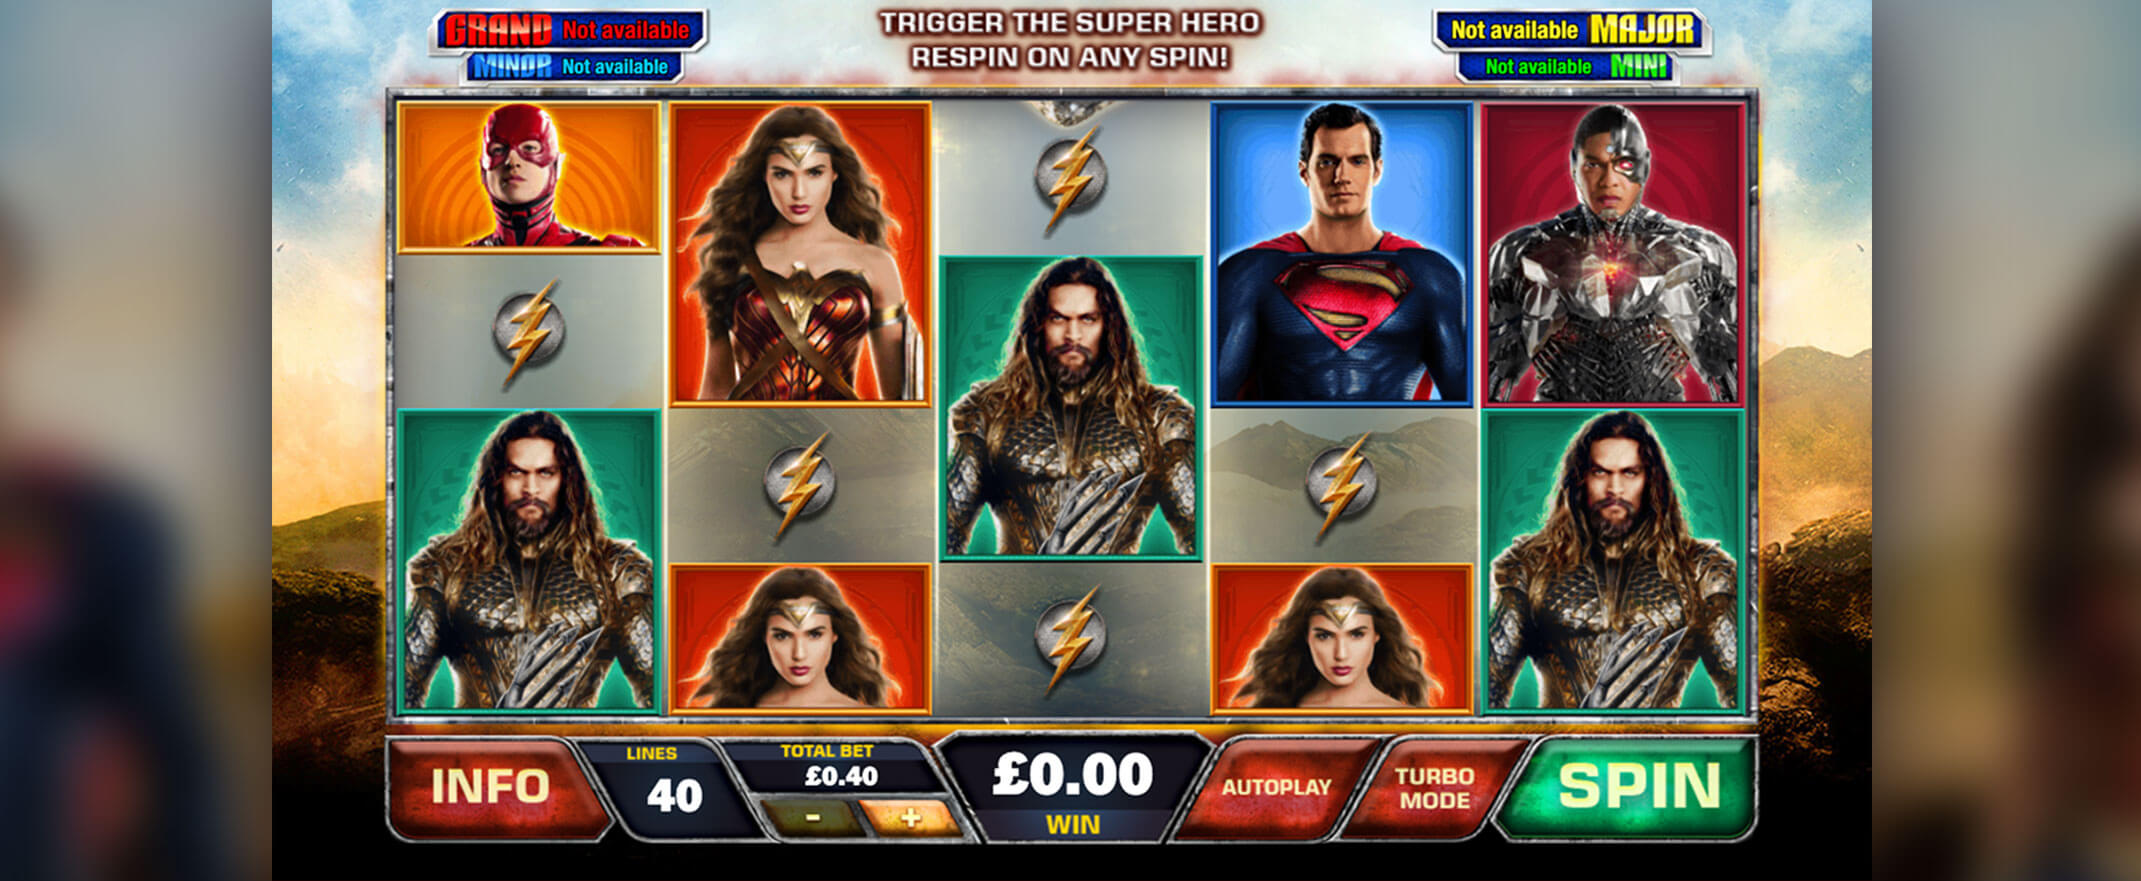 Justice League video slot by Playtech